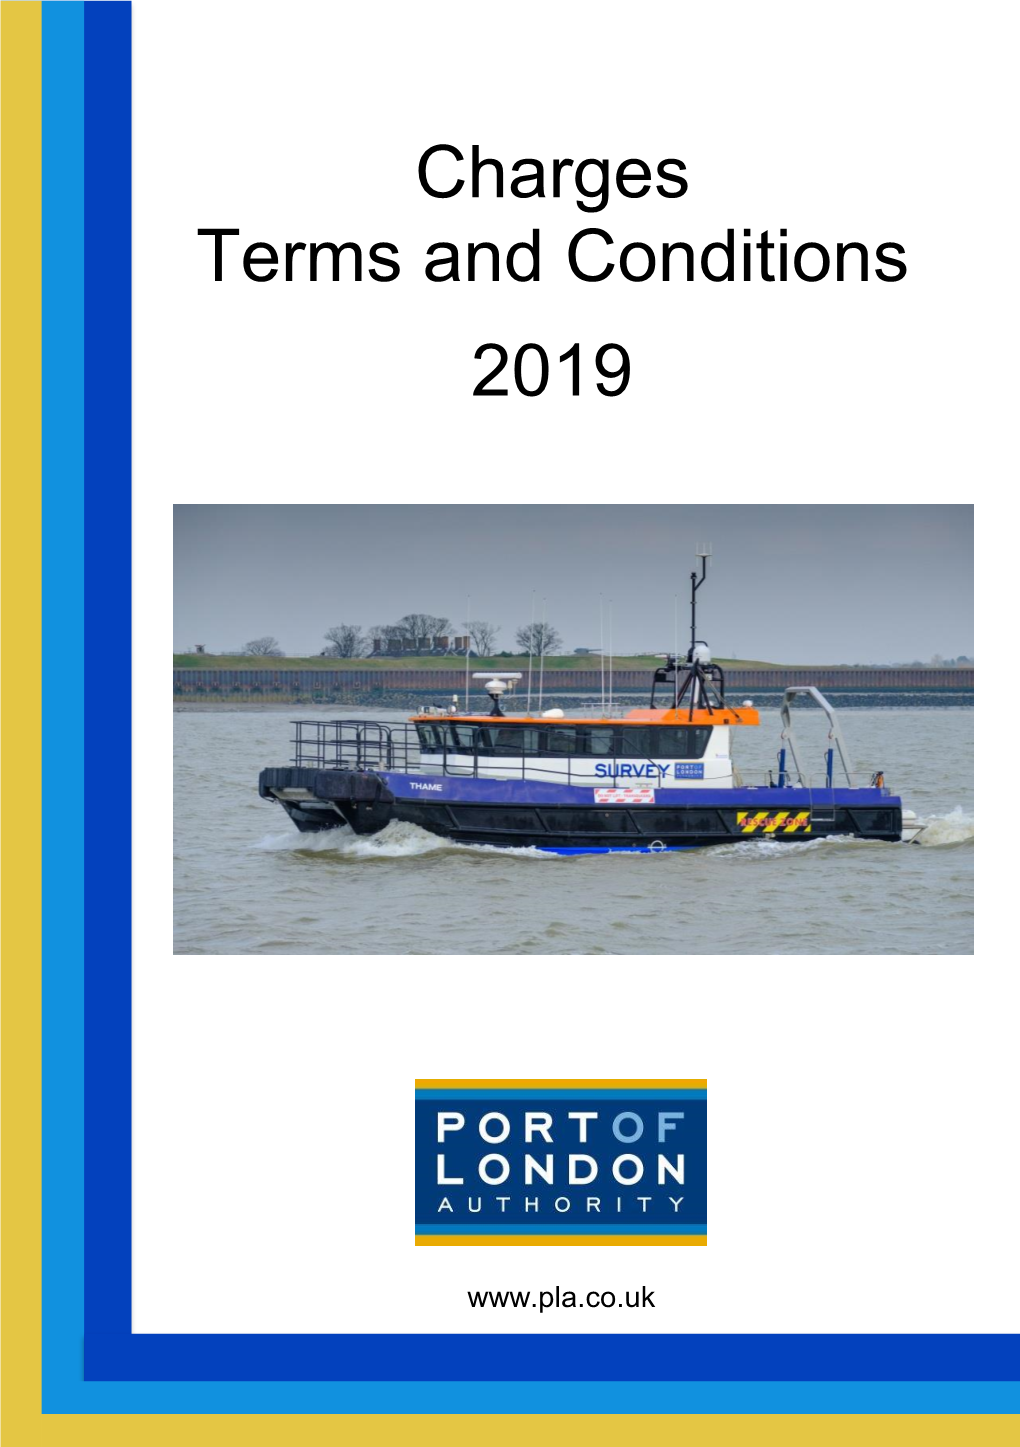 Charges Terms and Conditions 2019